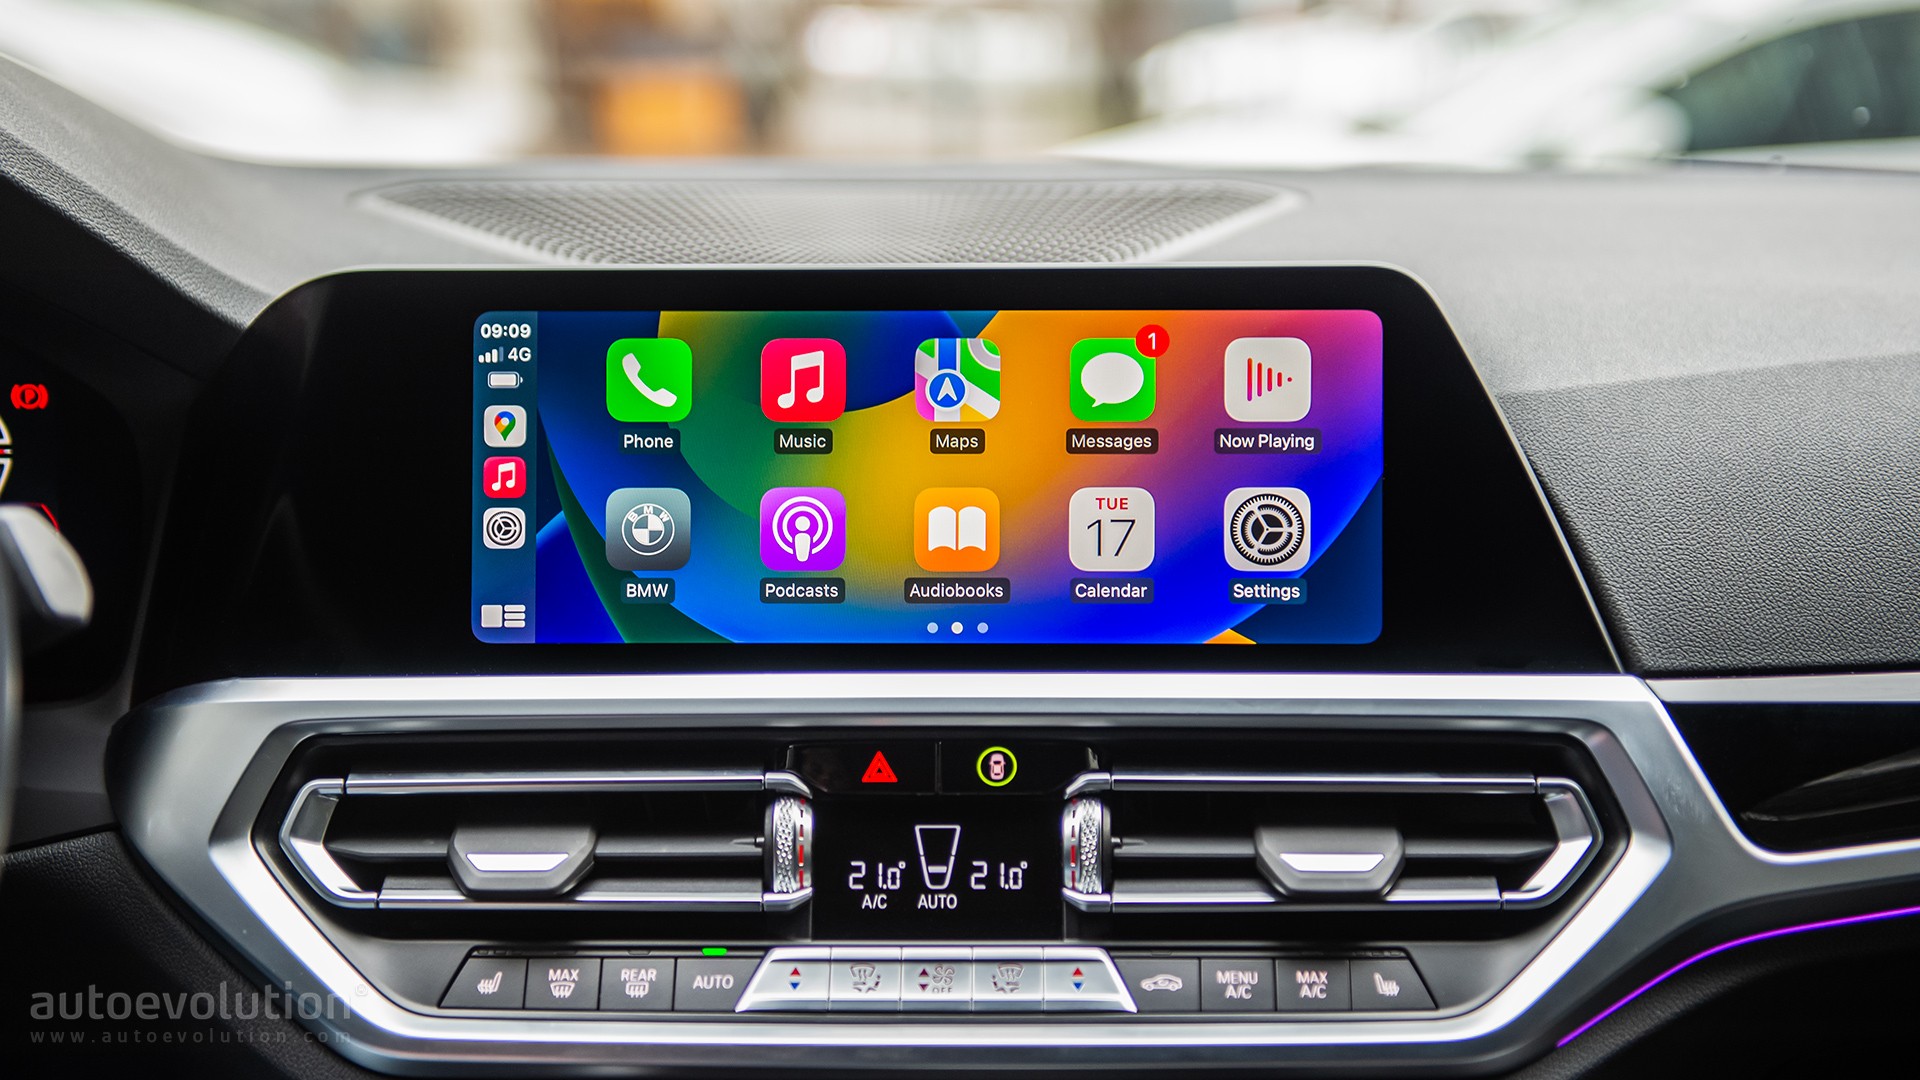 The World's First Wireless Android Auto Adapter Is Now a Lot